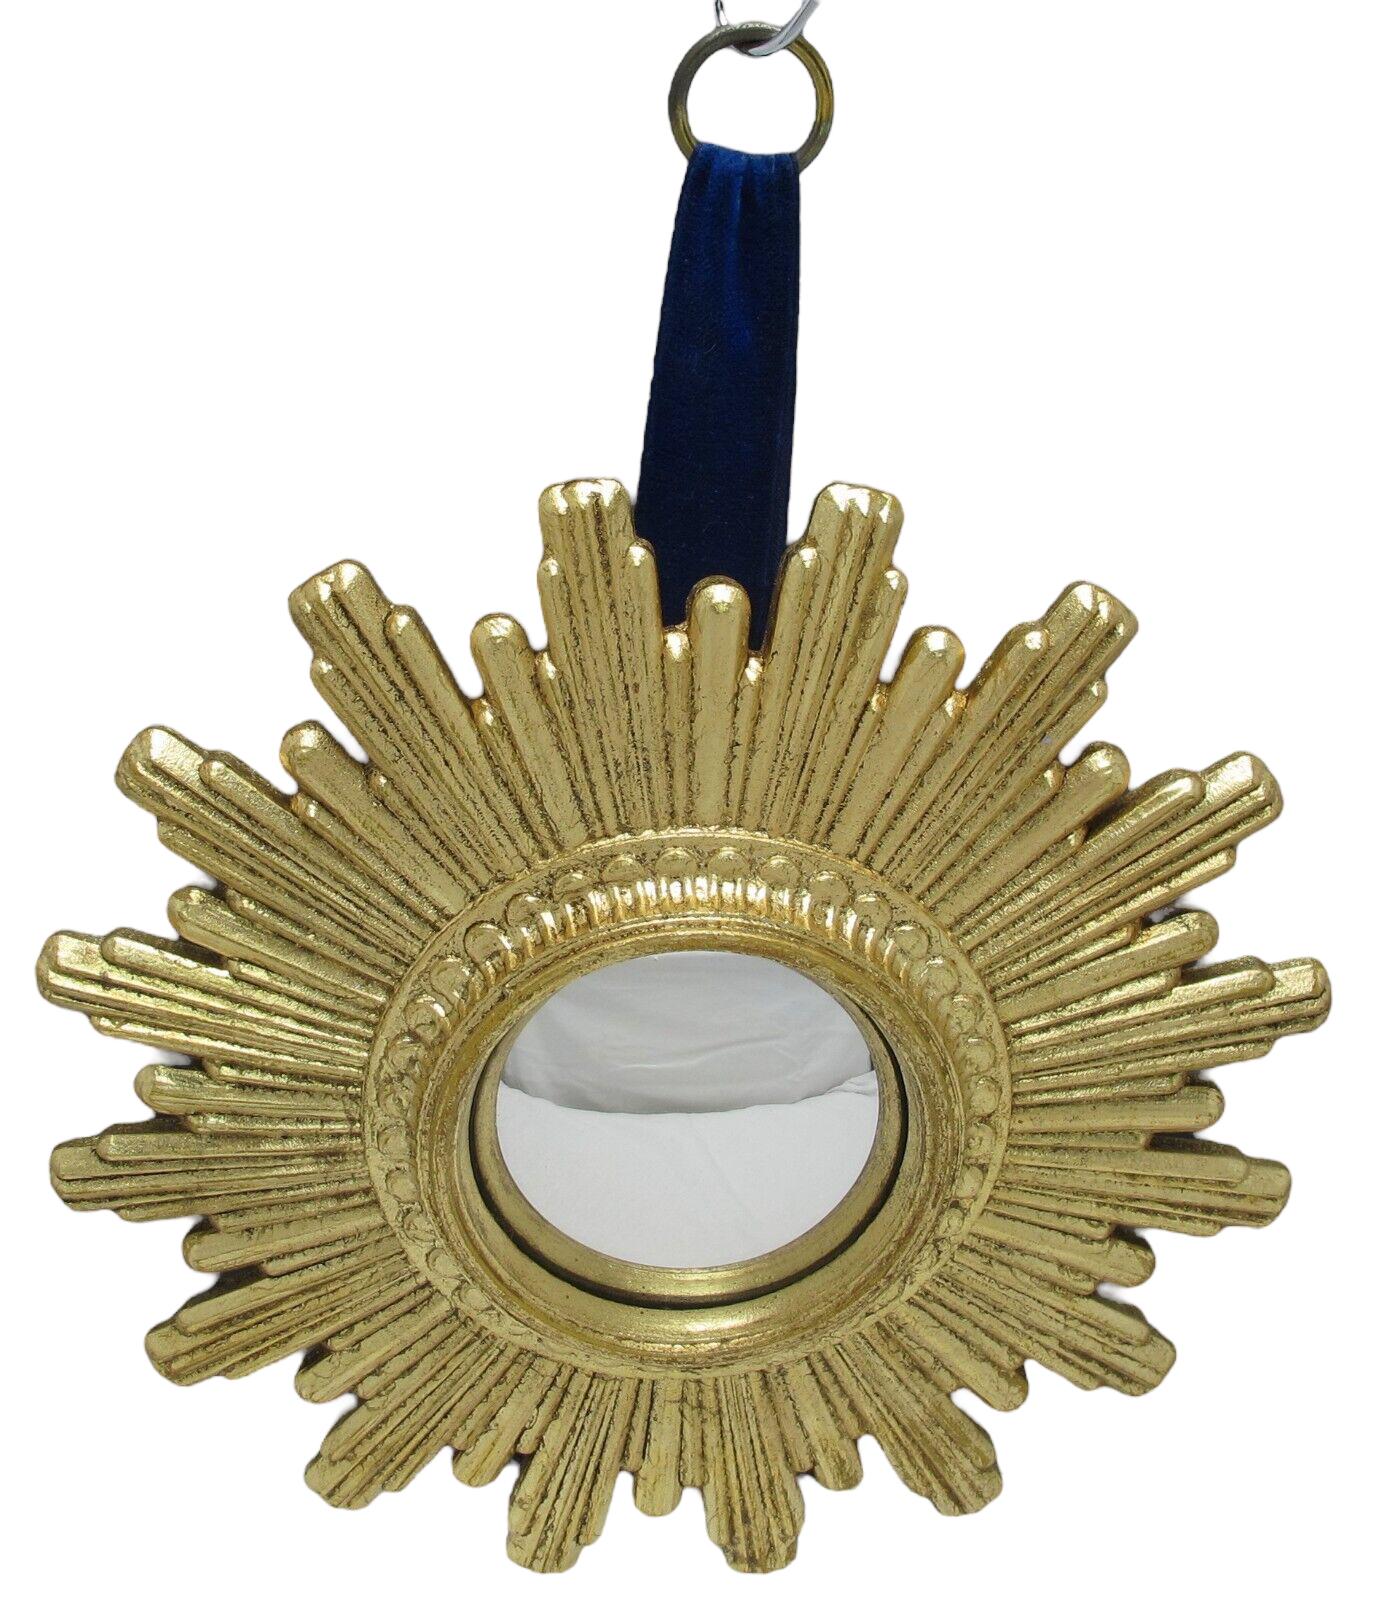 A cute sunburst or starburst mirror. Made of gilded composition. It measures approximate: 9.5